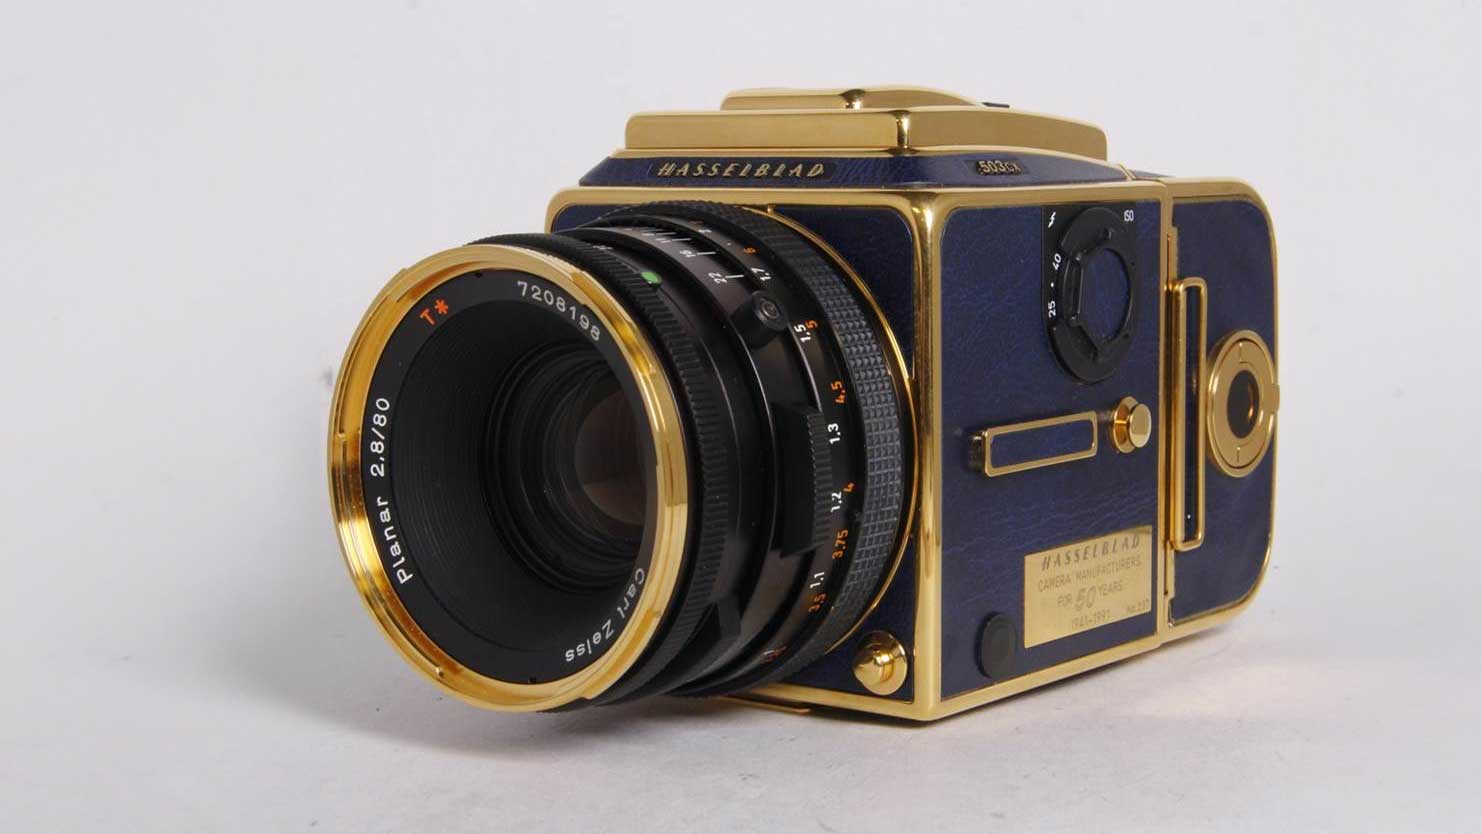 Rare blue and gold Hasselblad 503cx